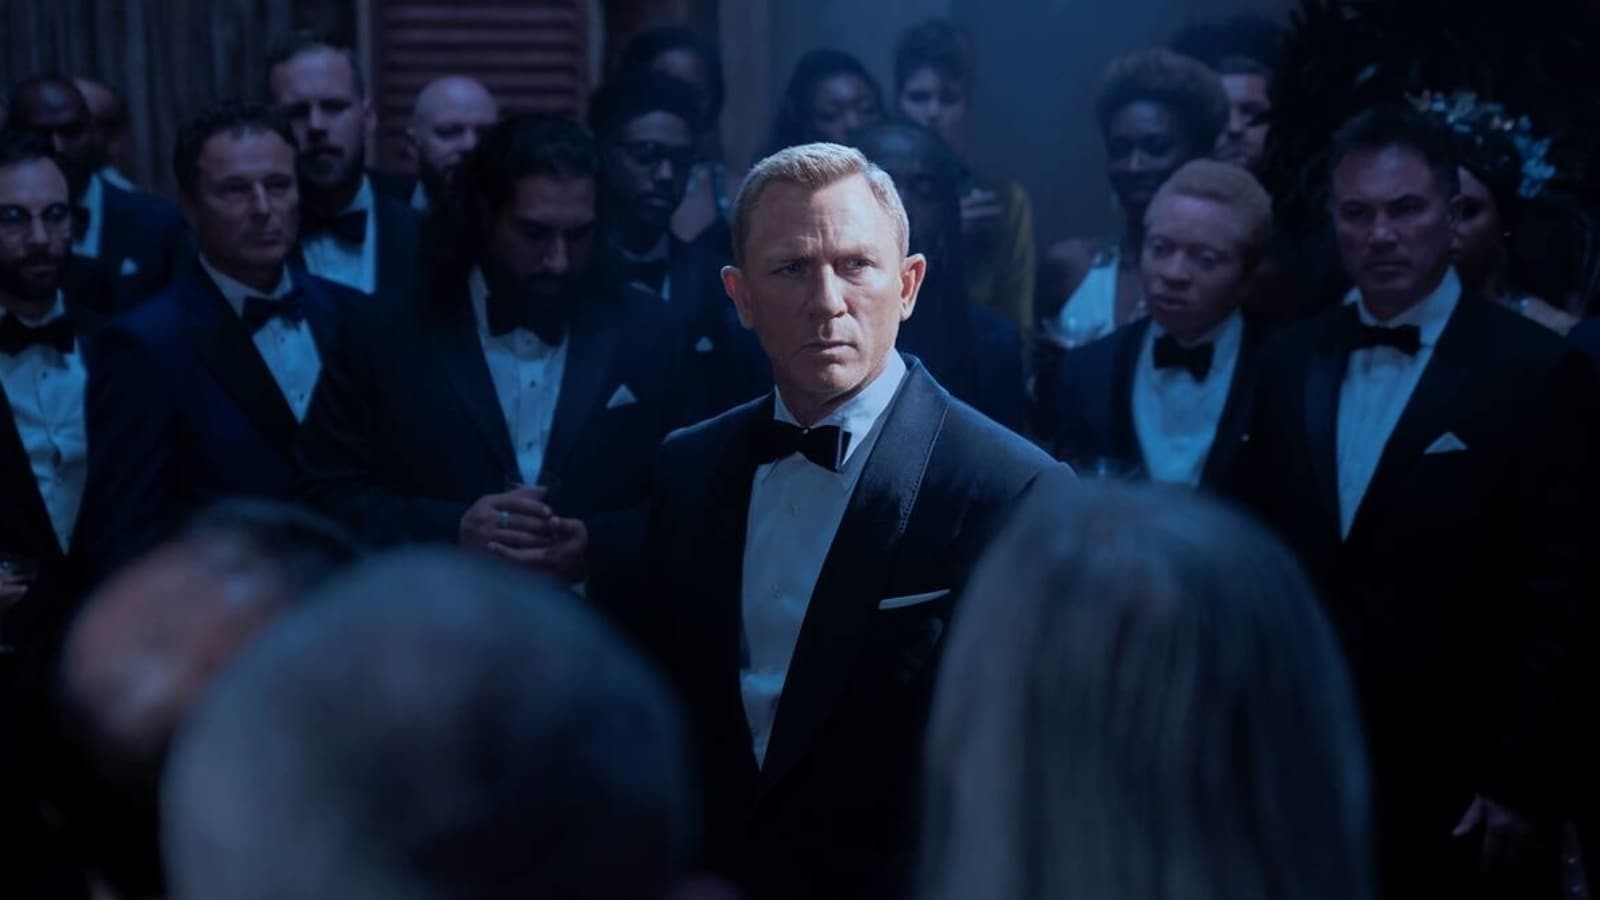 Daniel Craig portrays the character of Benoit Blanc in Knives Out (2019-).